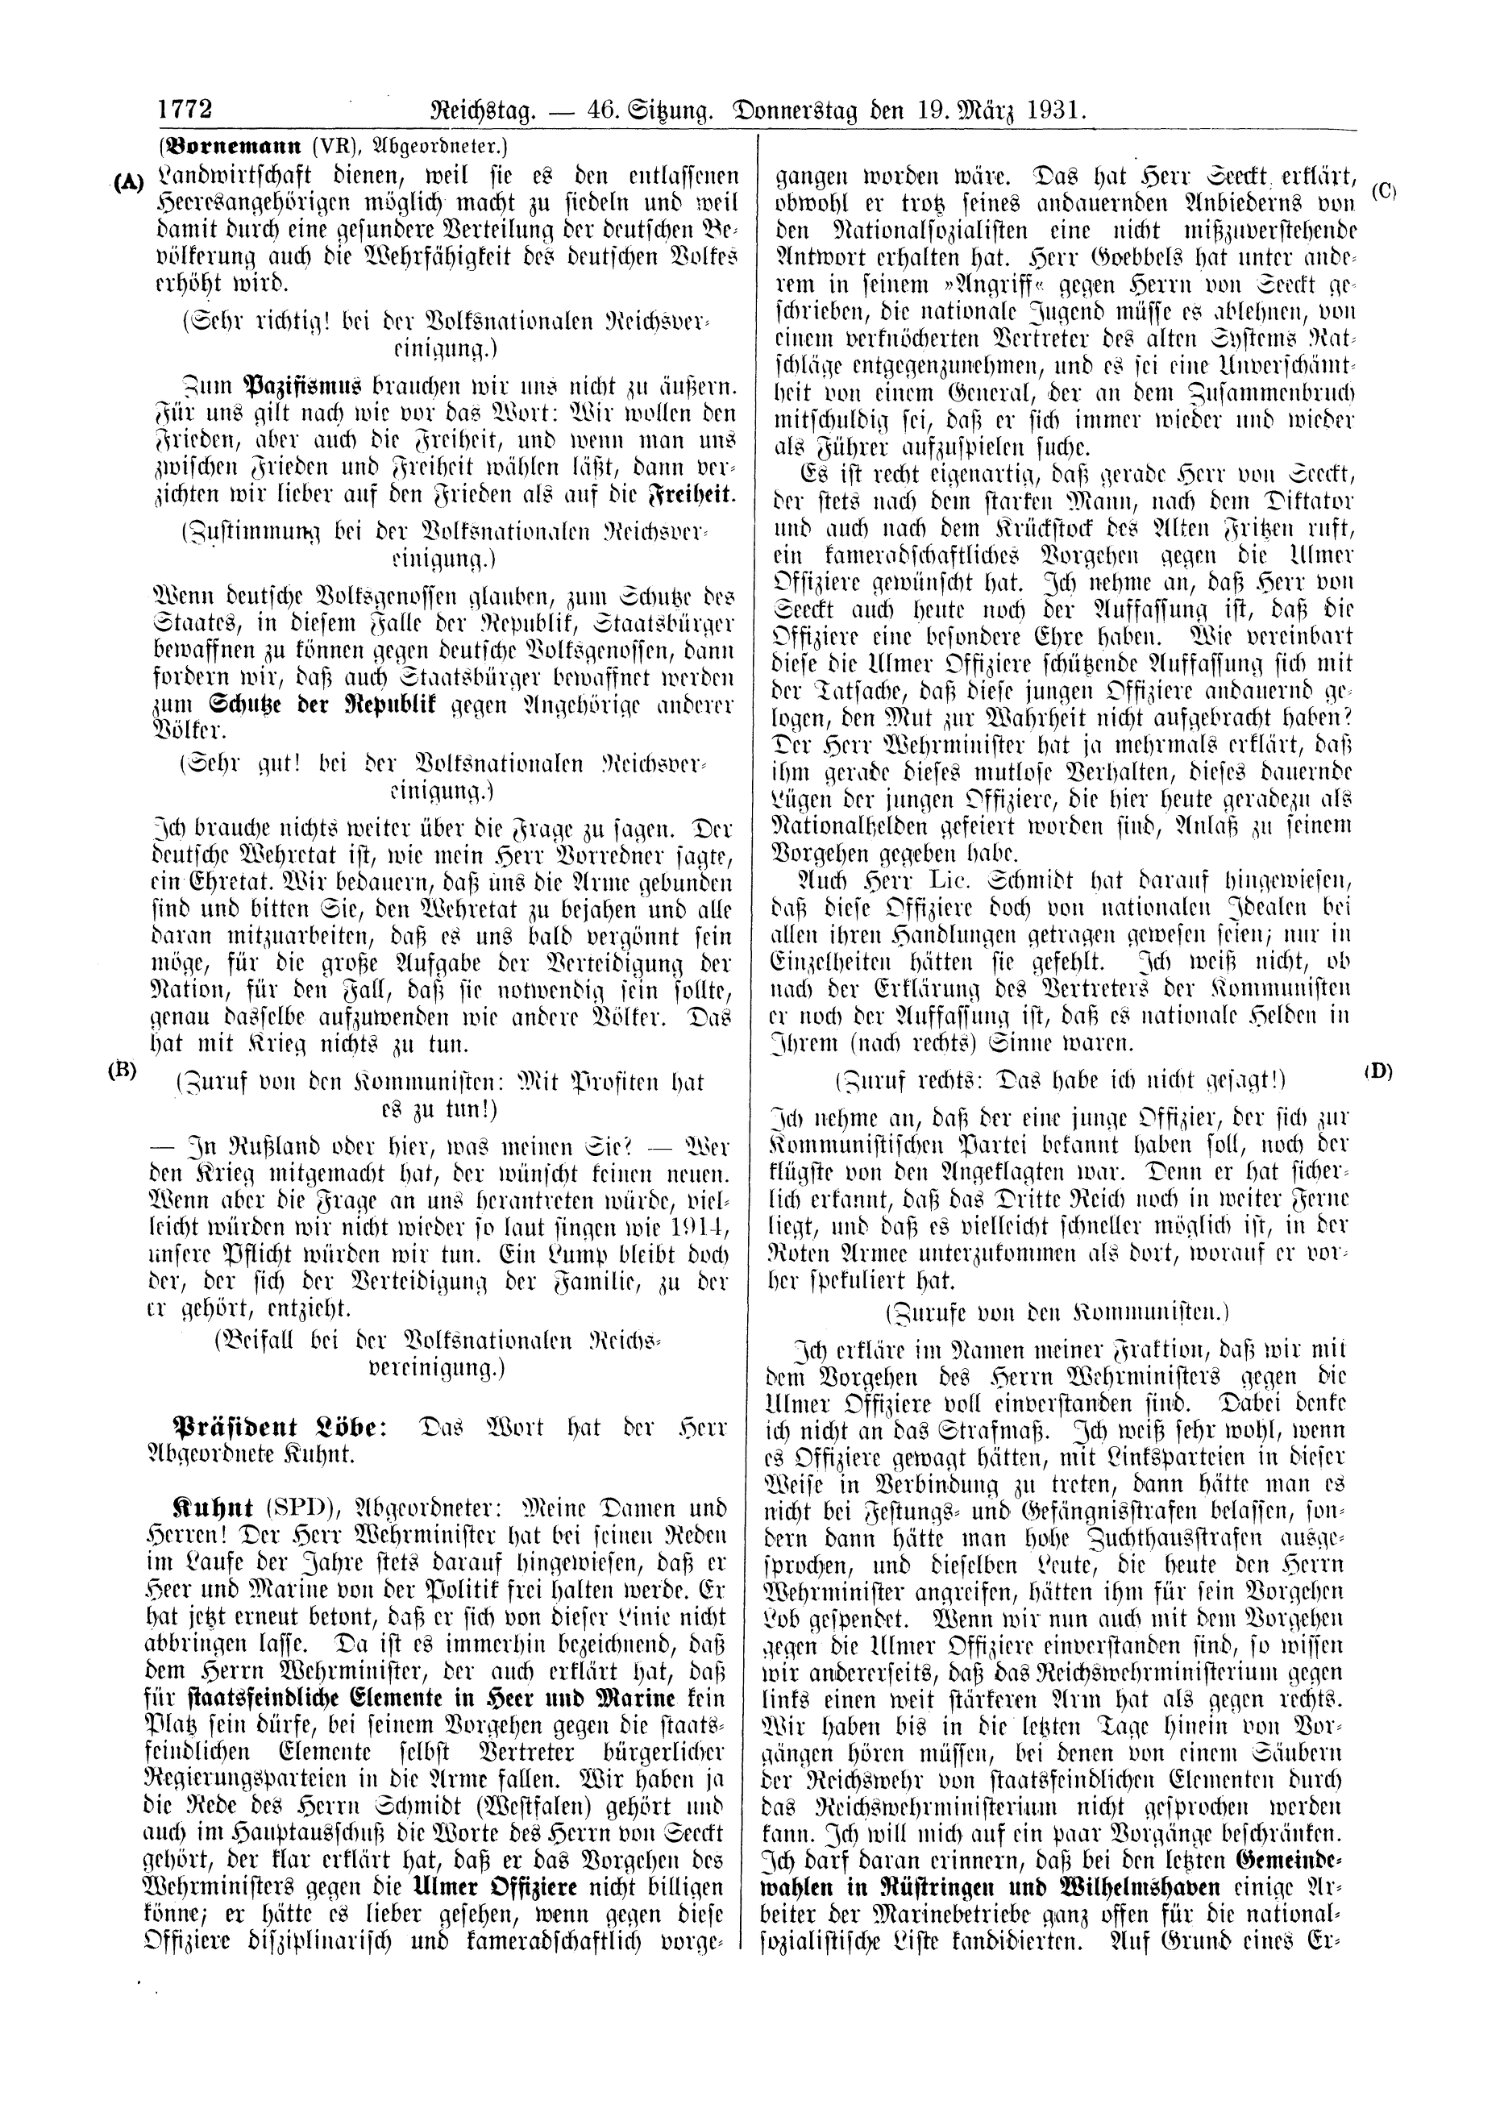 Scan of page 1772